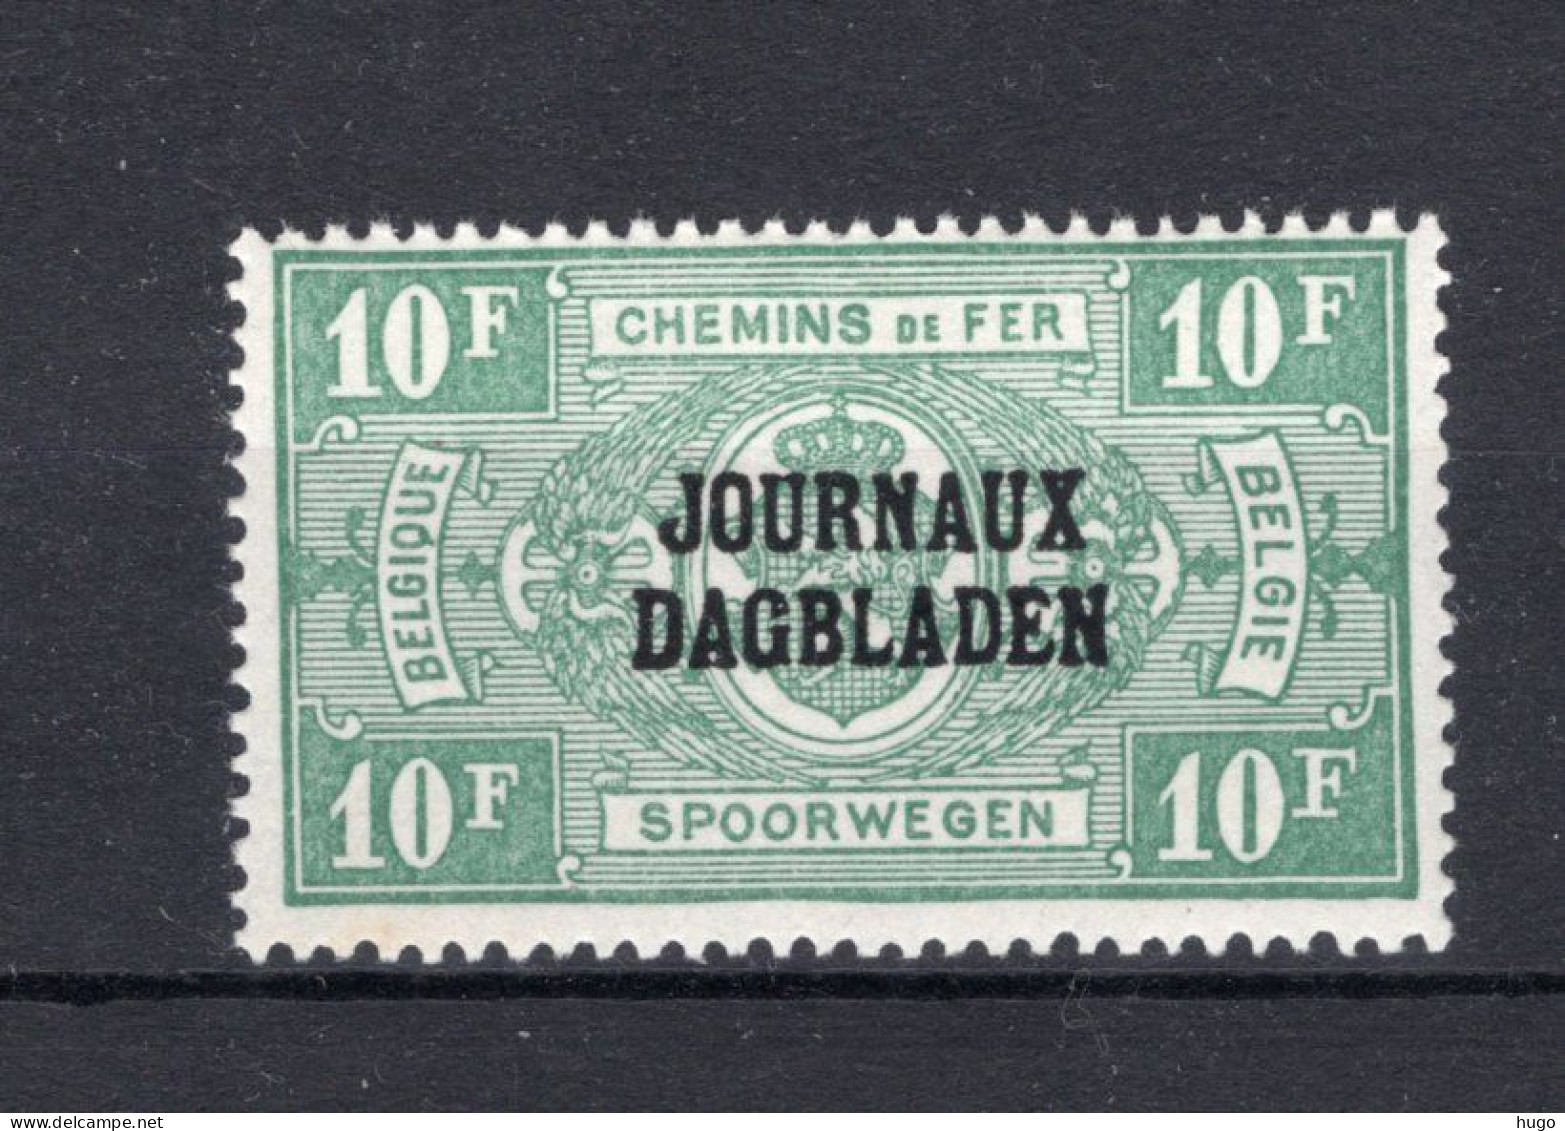 JO35 MNH** 1929 - Type I, R Staat Boven BL - Sot - Periódicos [JO]